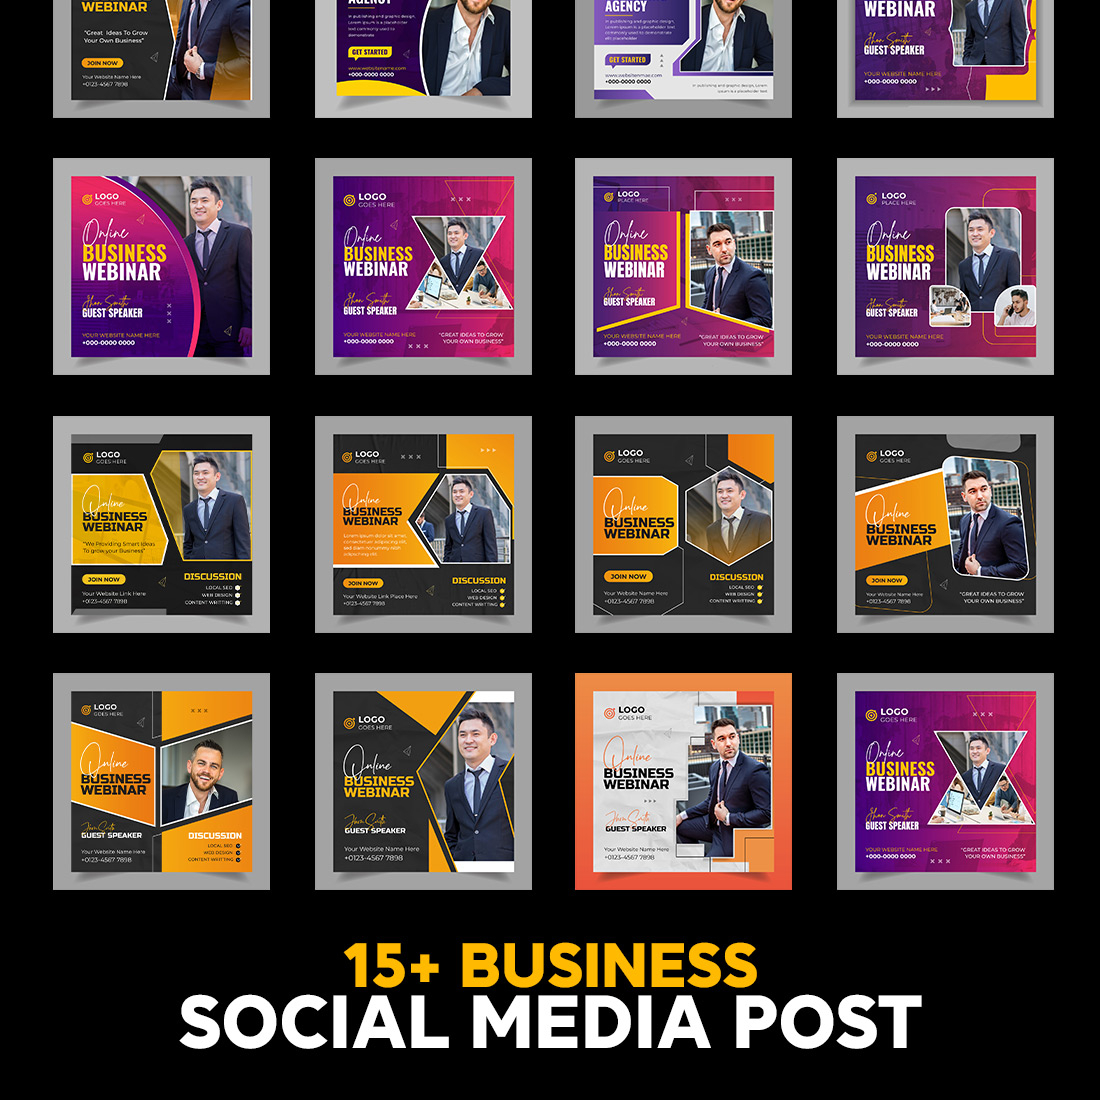 15+Digital marketing agency webinar or corporate social media post template vector only-$6 cover image.